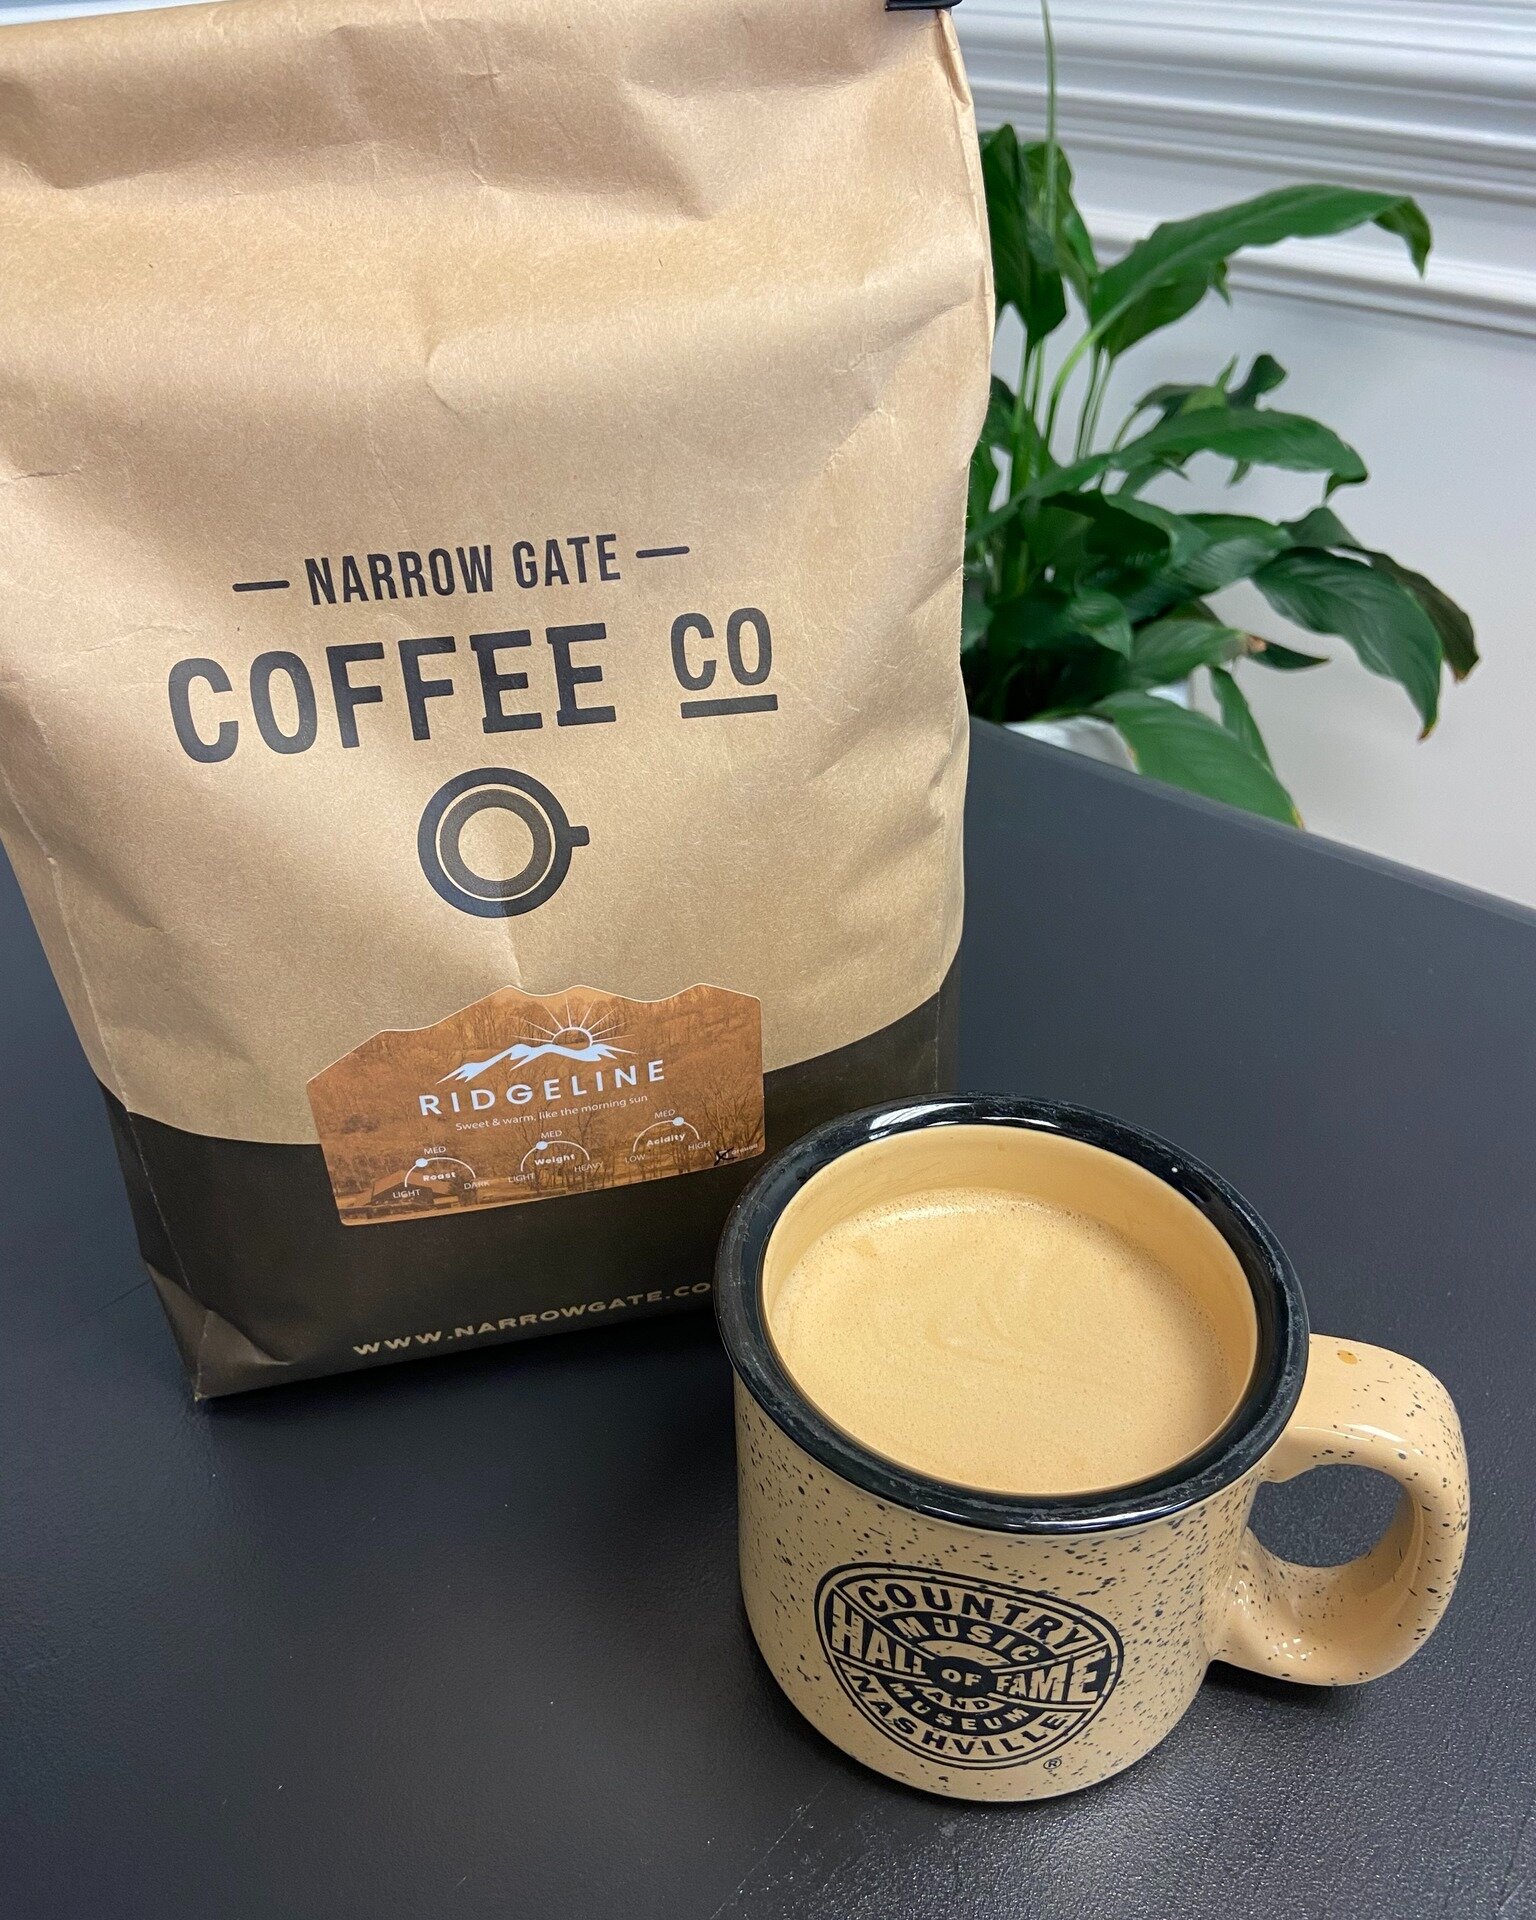 We believe in cultivating connections with other businesses through our closings. When we met @neb_snoyl and his mission-driven @narrowgatecoffeeco, we had to try some.